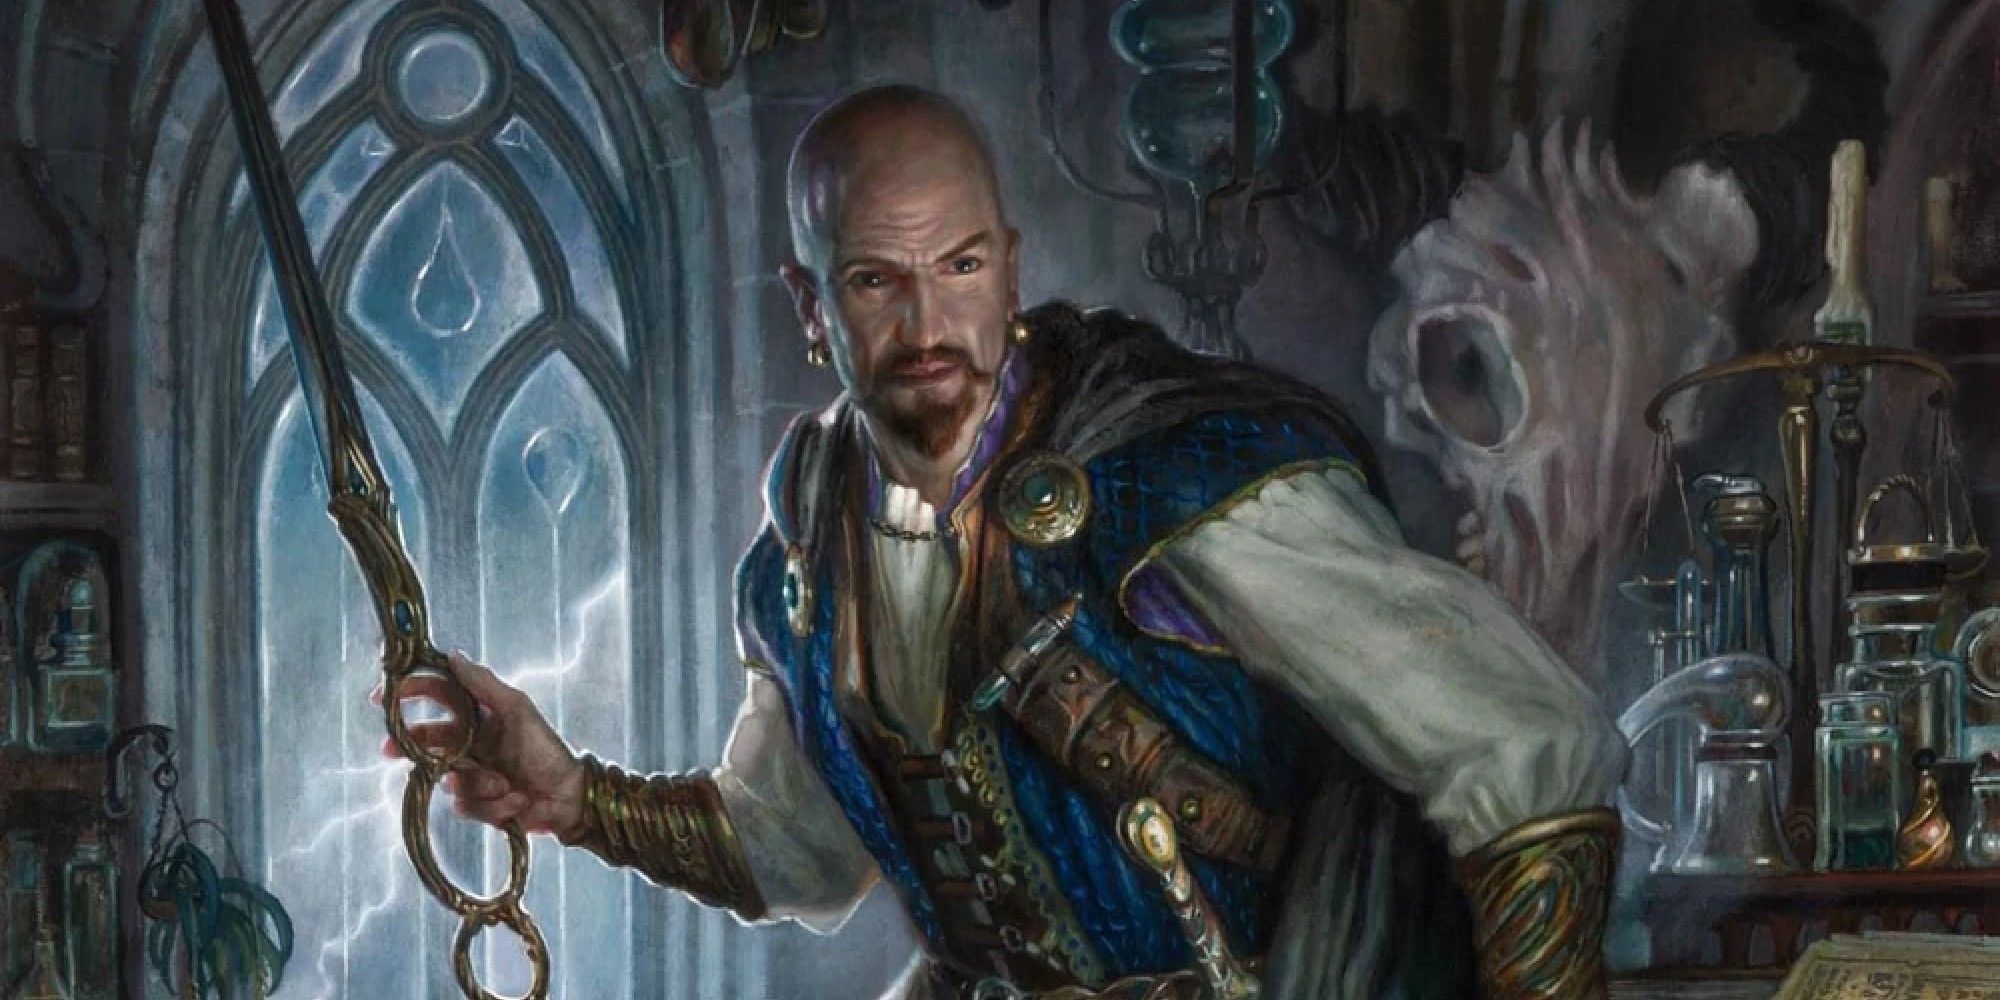 Magic: The Gathering AFR: Mordenkainen In His Tower